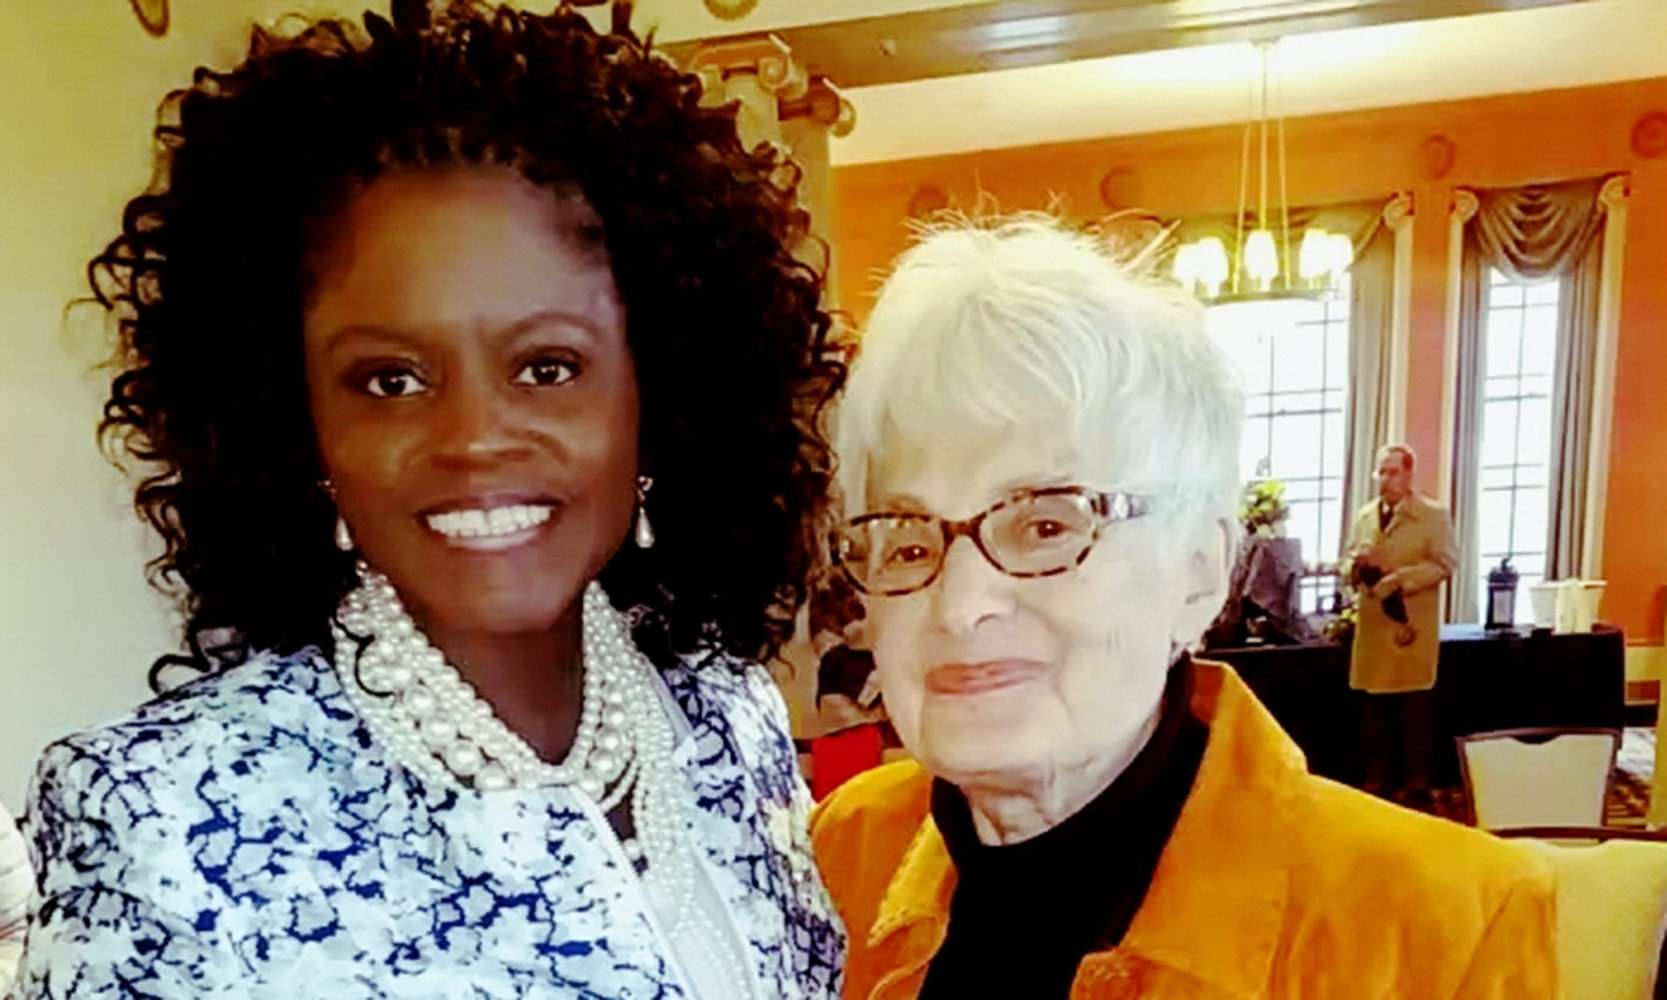 Sharon Harris standing with older white woman.